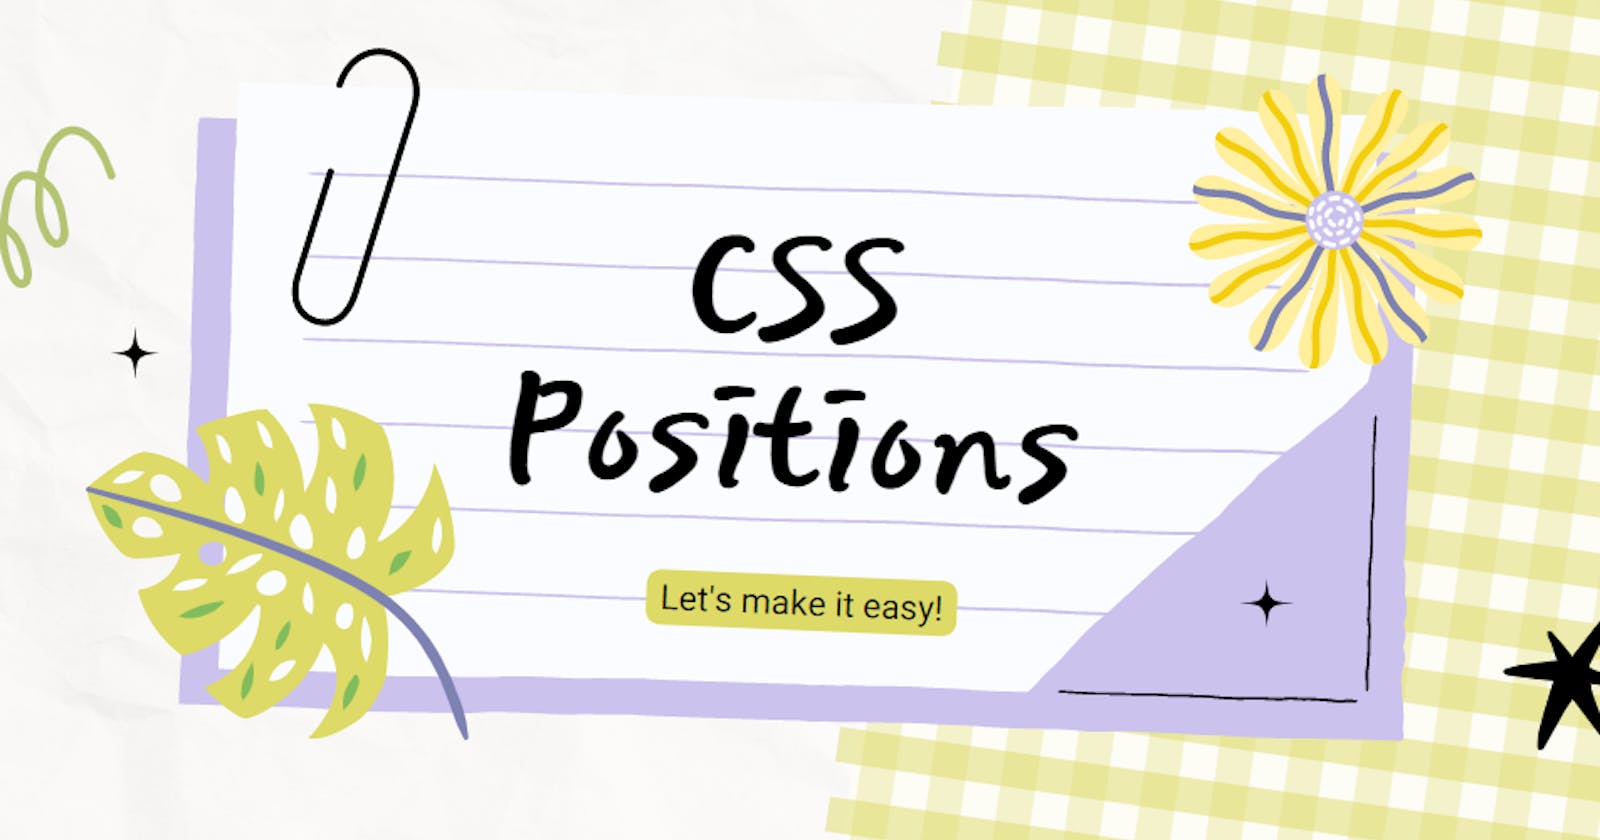 Making CSS Positions Easy Once & For All.